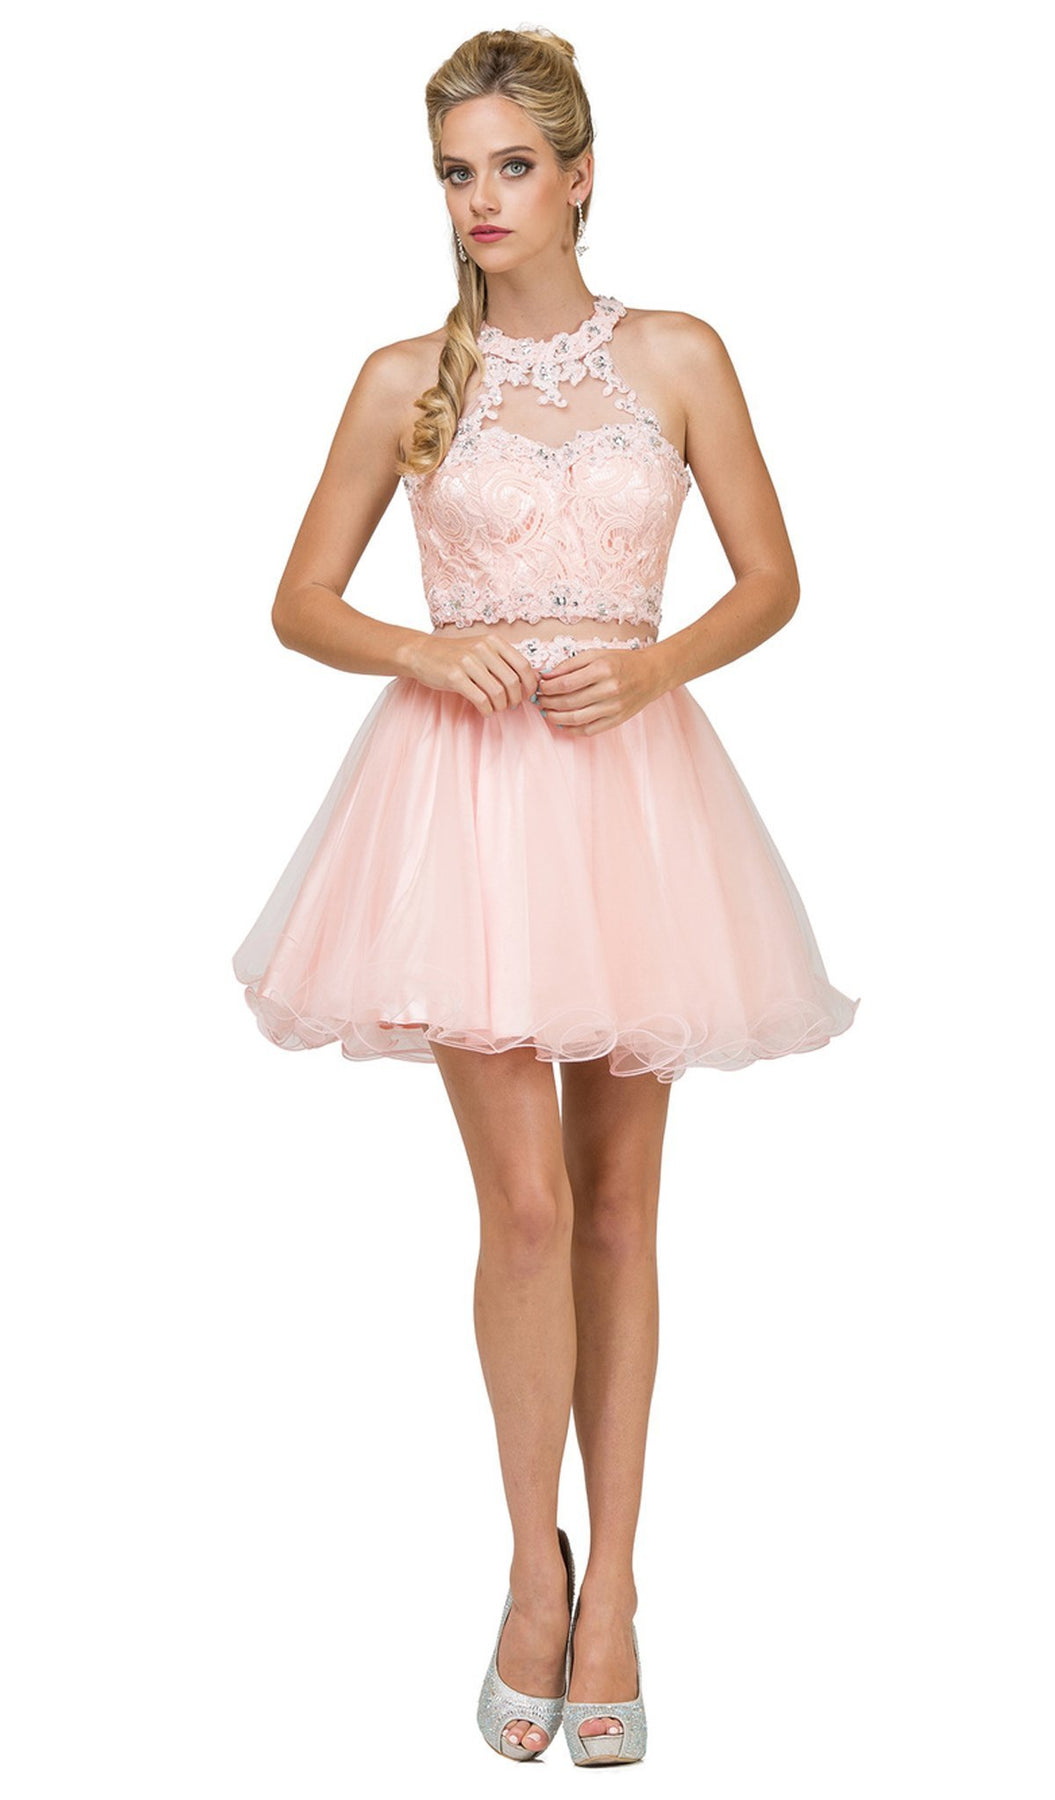 Dancing Queen - 9631 Appliqued Illusion High Neck Two-Piece Cocktail Dress In Pink